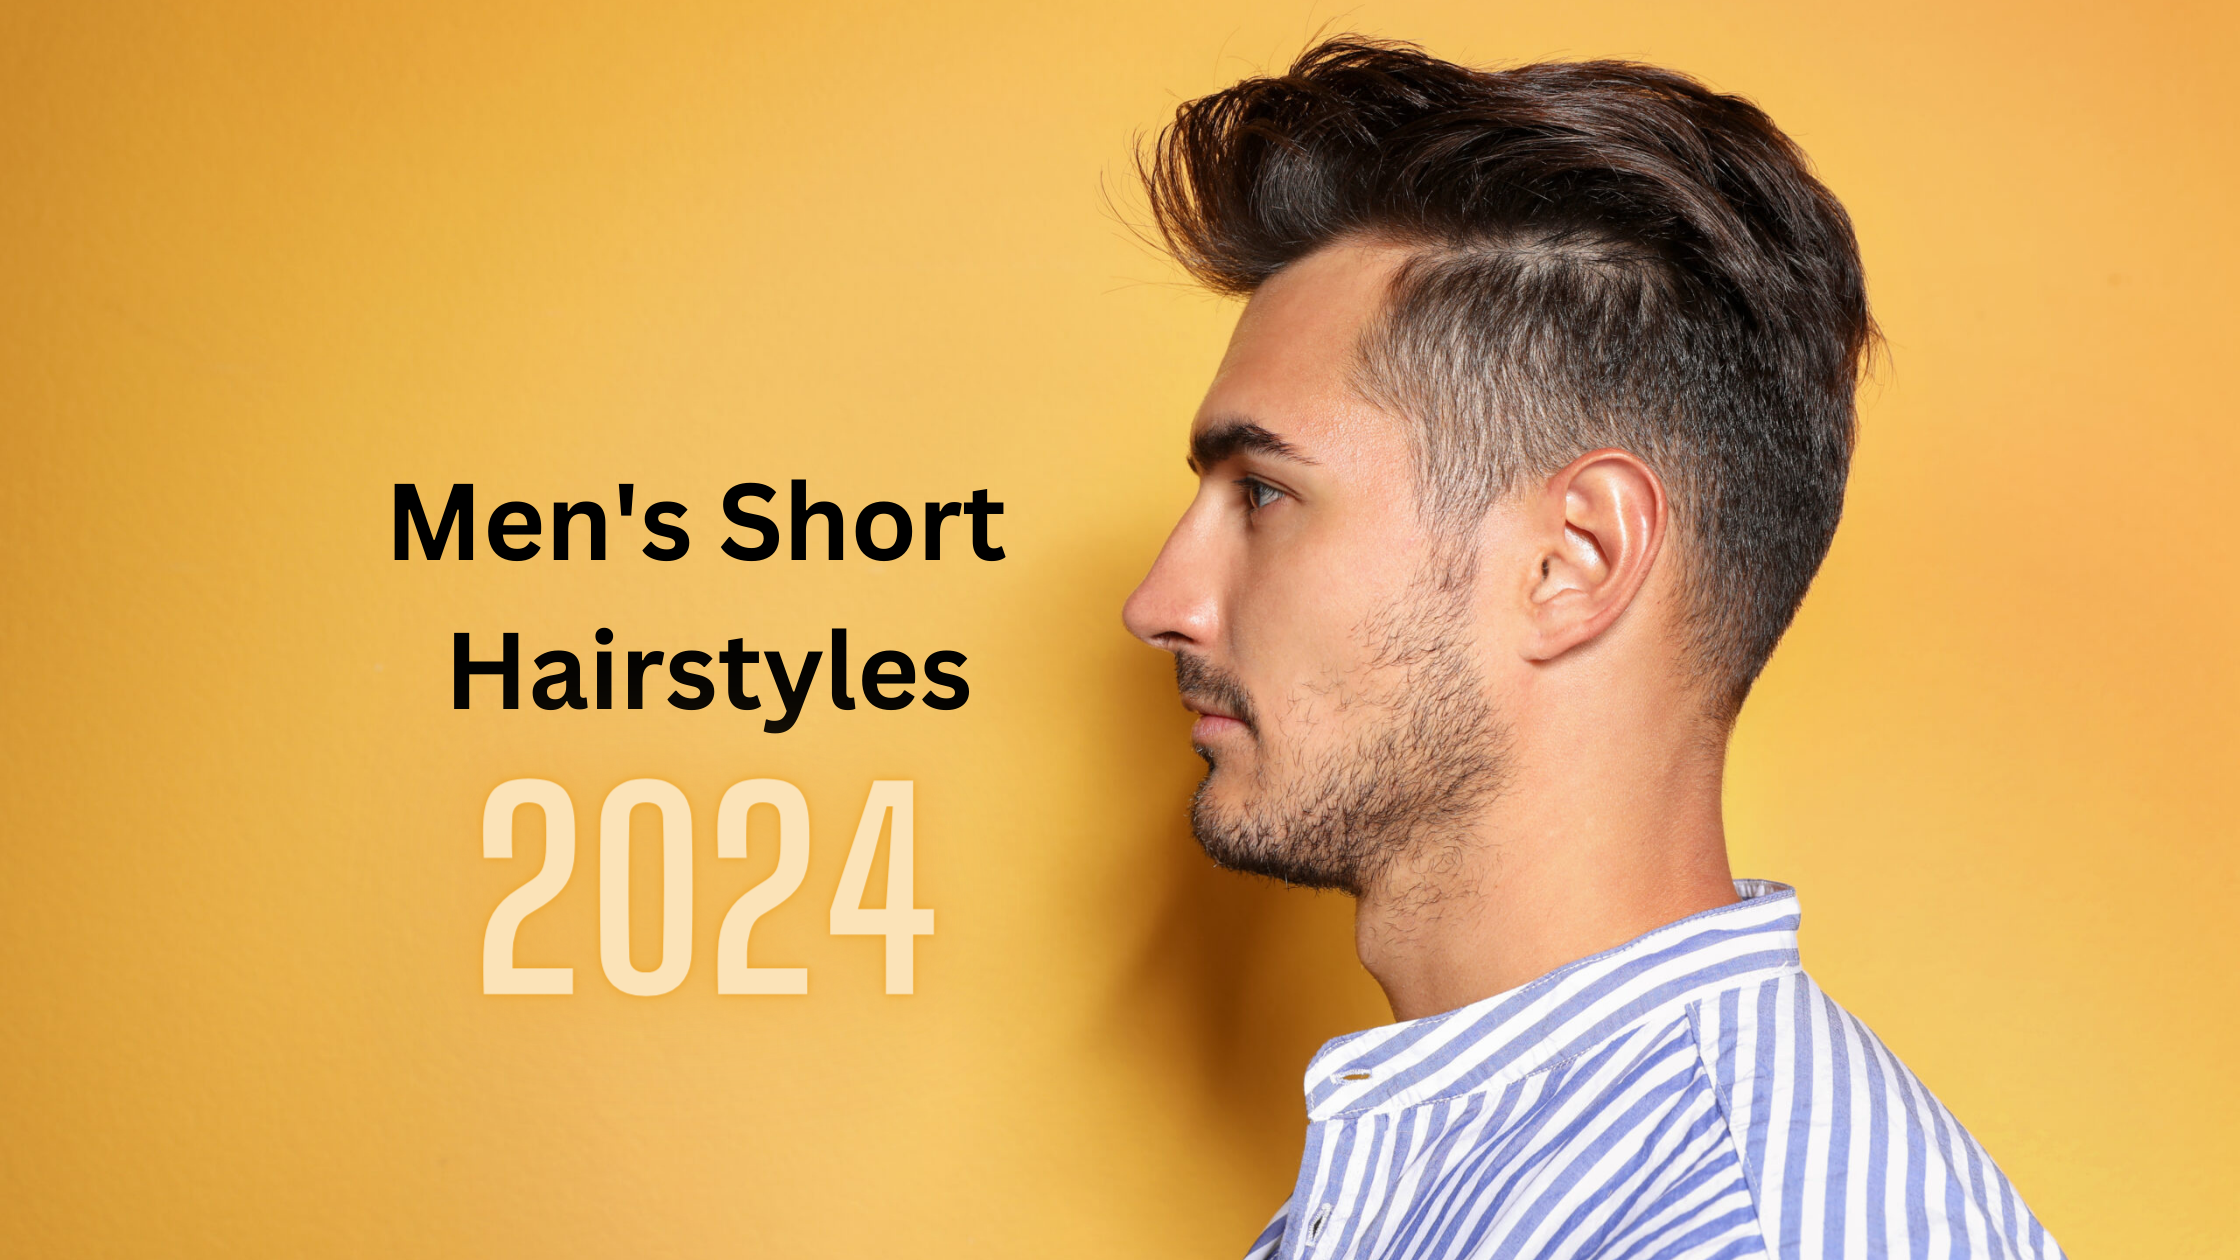 20 BEST CURLY HAIRSTYLES FOR MEN TO GET IN 2023 - AR45 (SEO Expert) - Medium